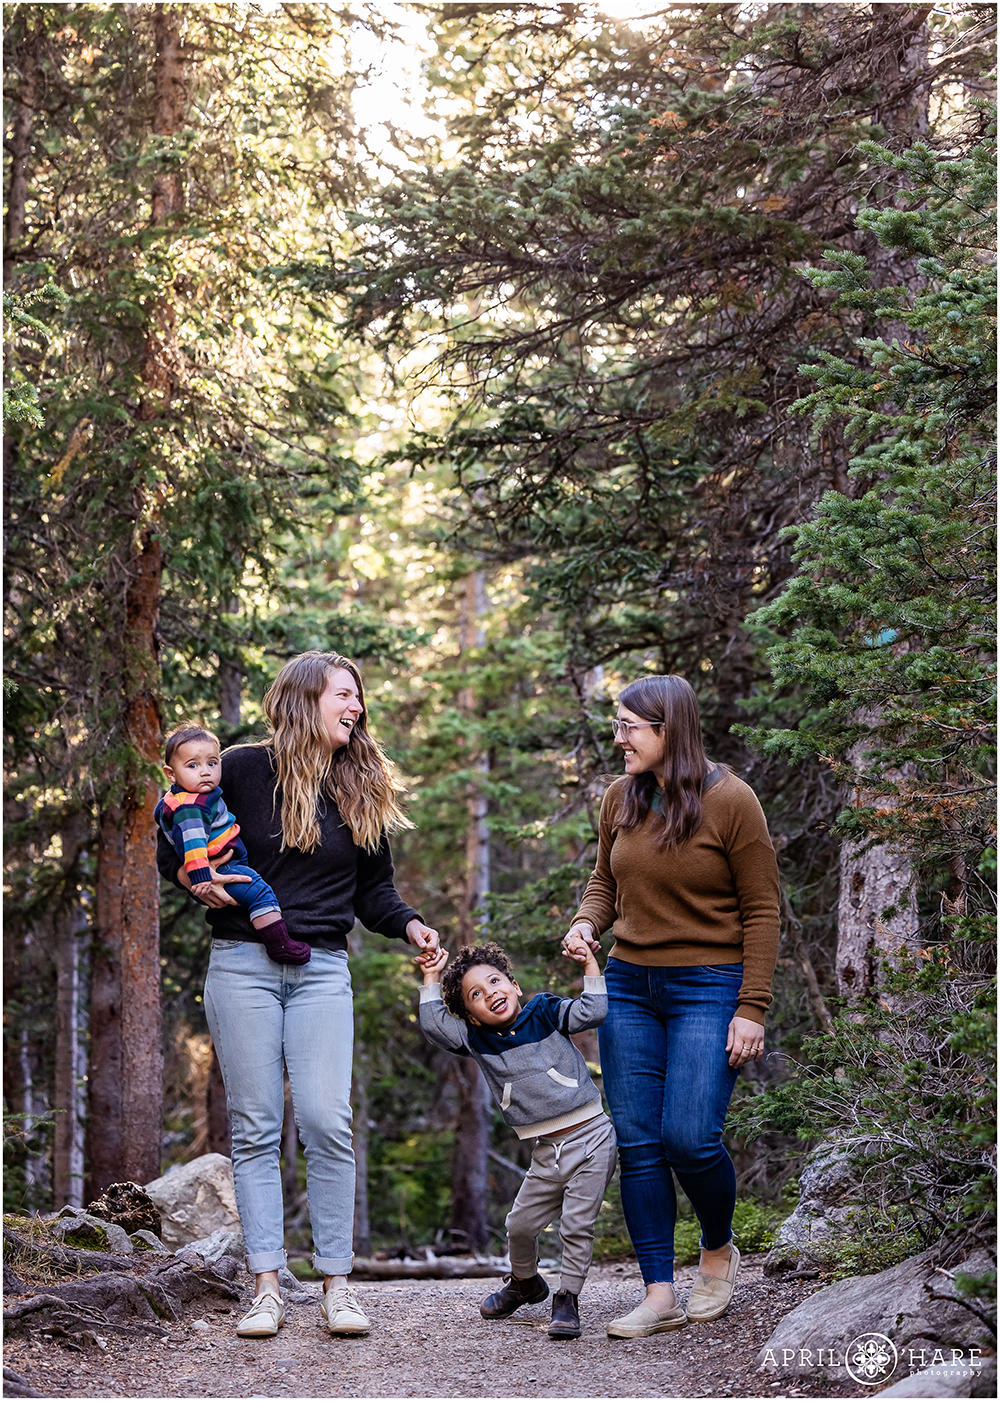 A sweet family of four with two moms walk with their young sons in the woods at Indian Peaks Wilderness Area near Boulder CO